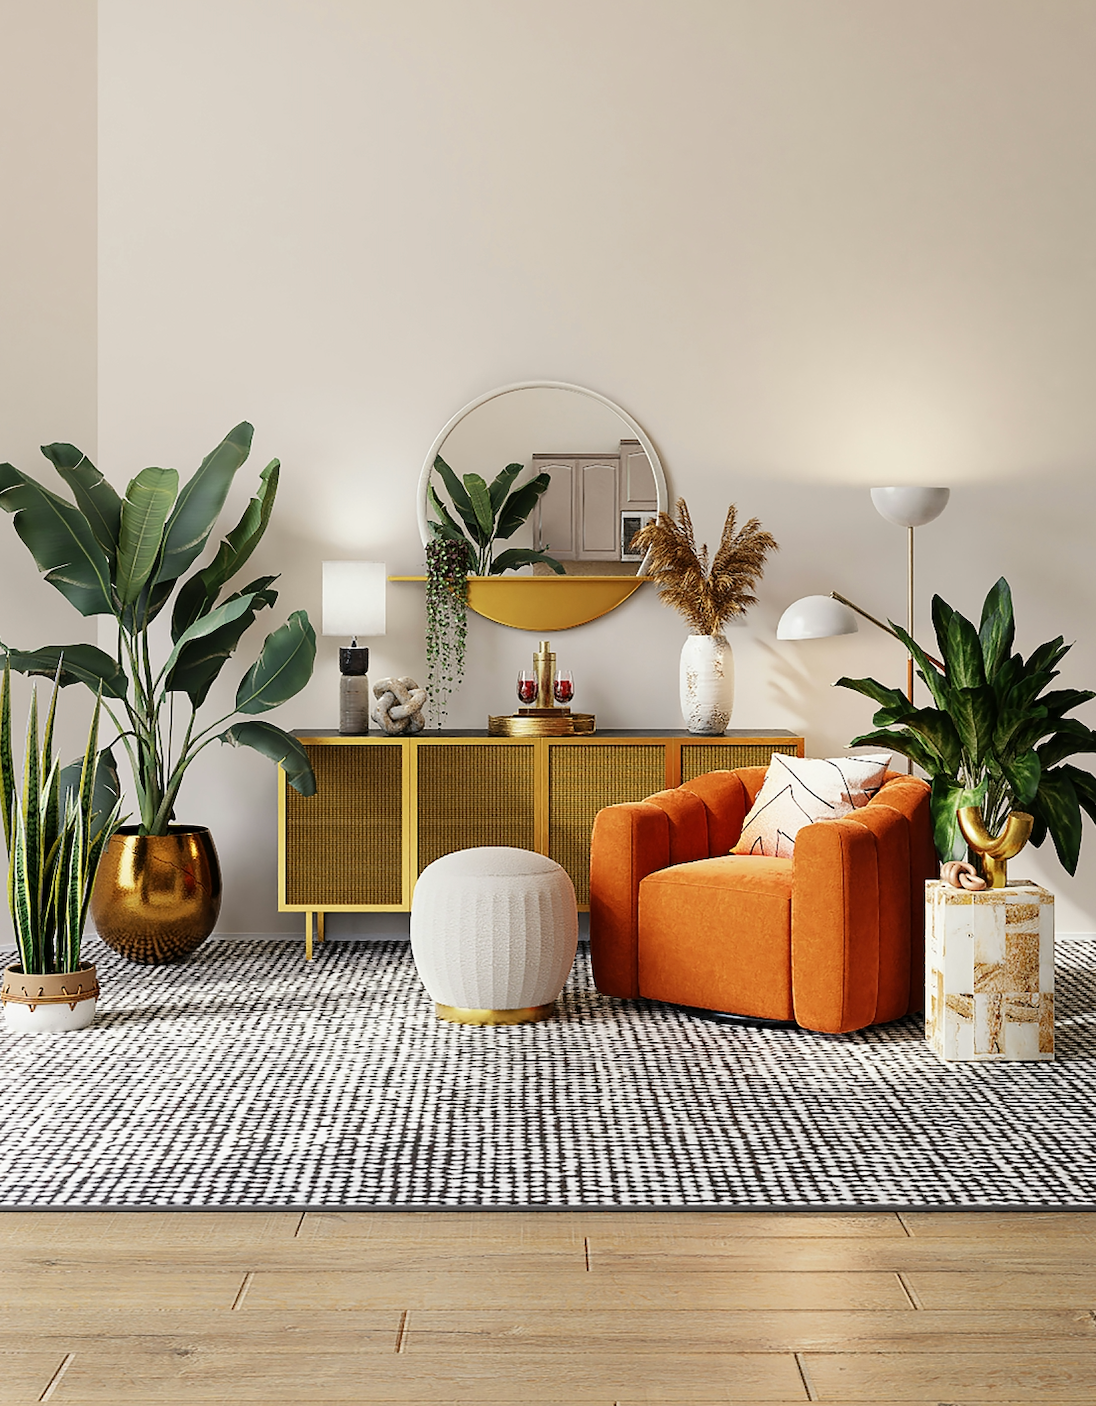 Bringing Nature Indoors: Homeware Inspired by the Outdoors